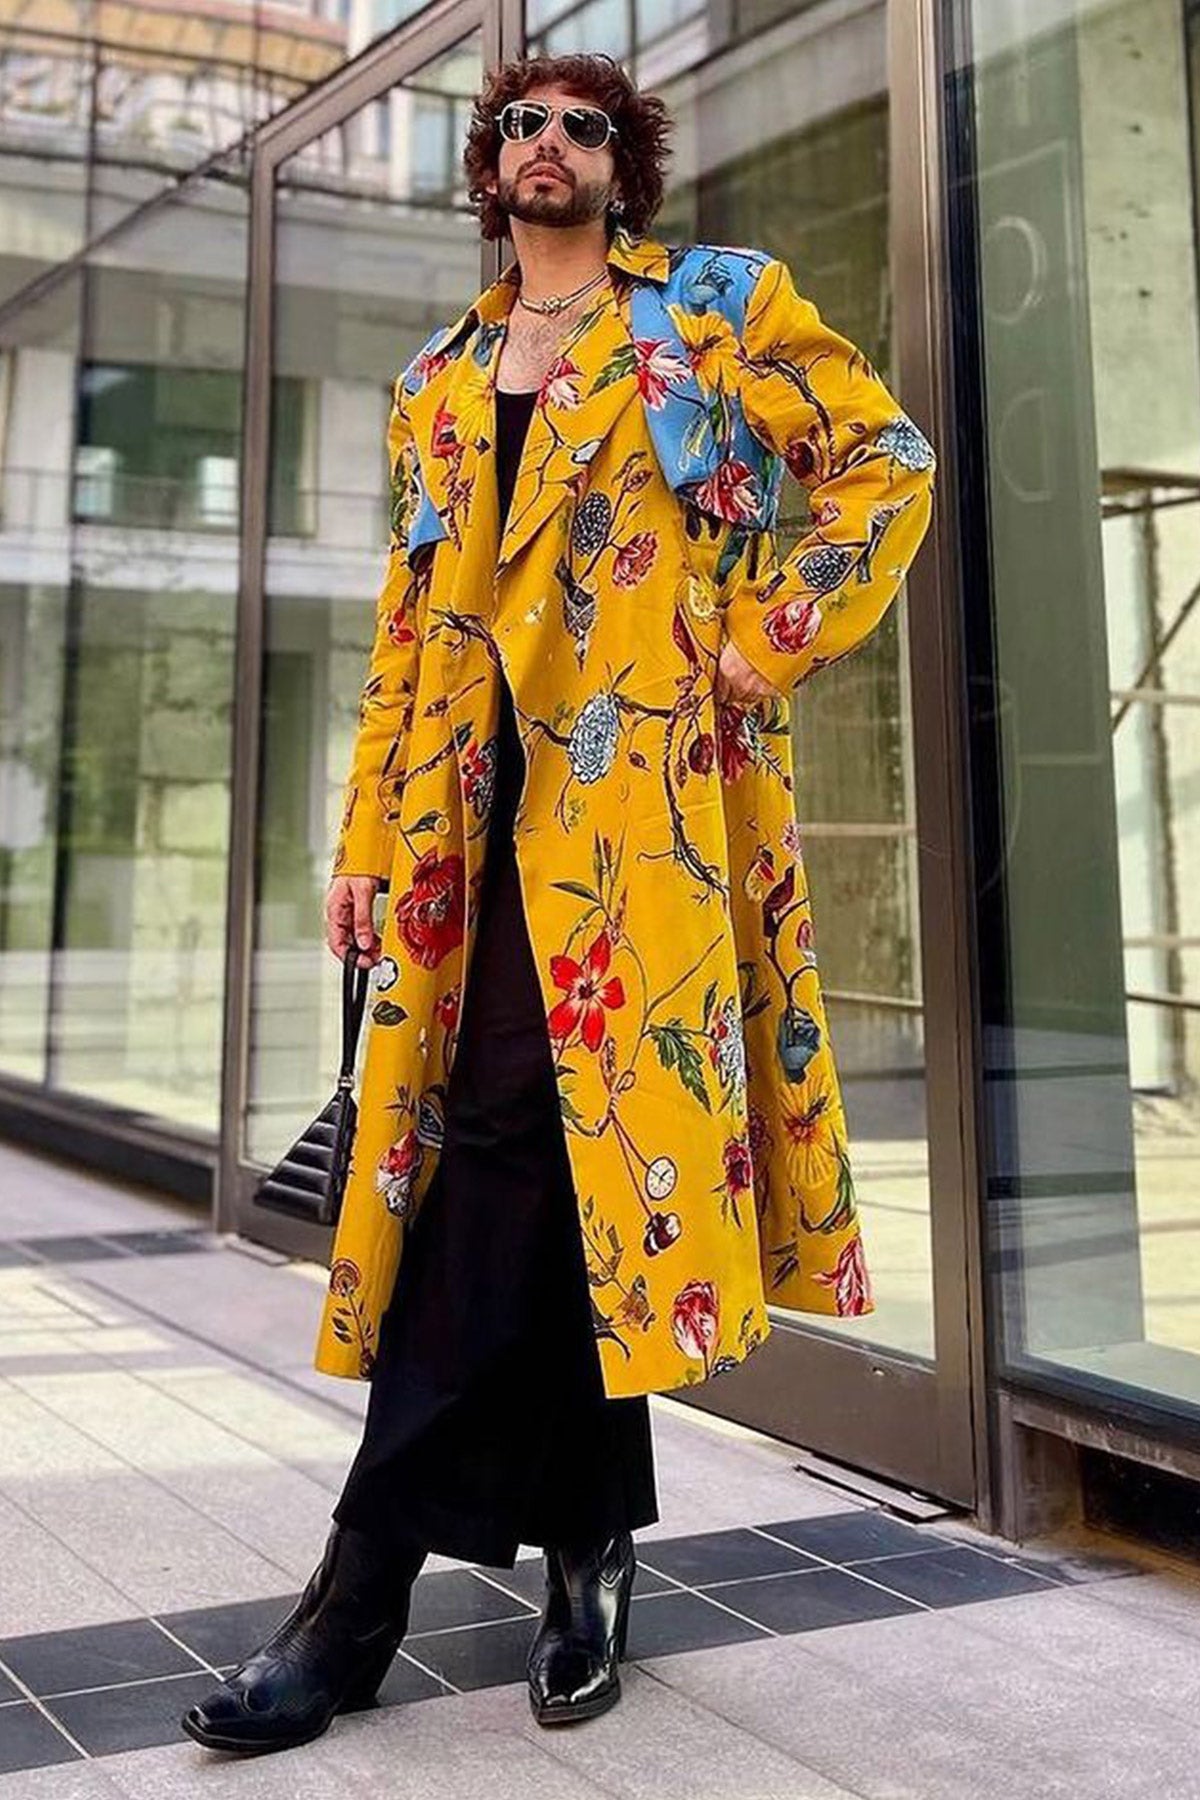 SIDDHARTH BATRA IN PRINTED TRENCH COAT